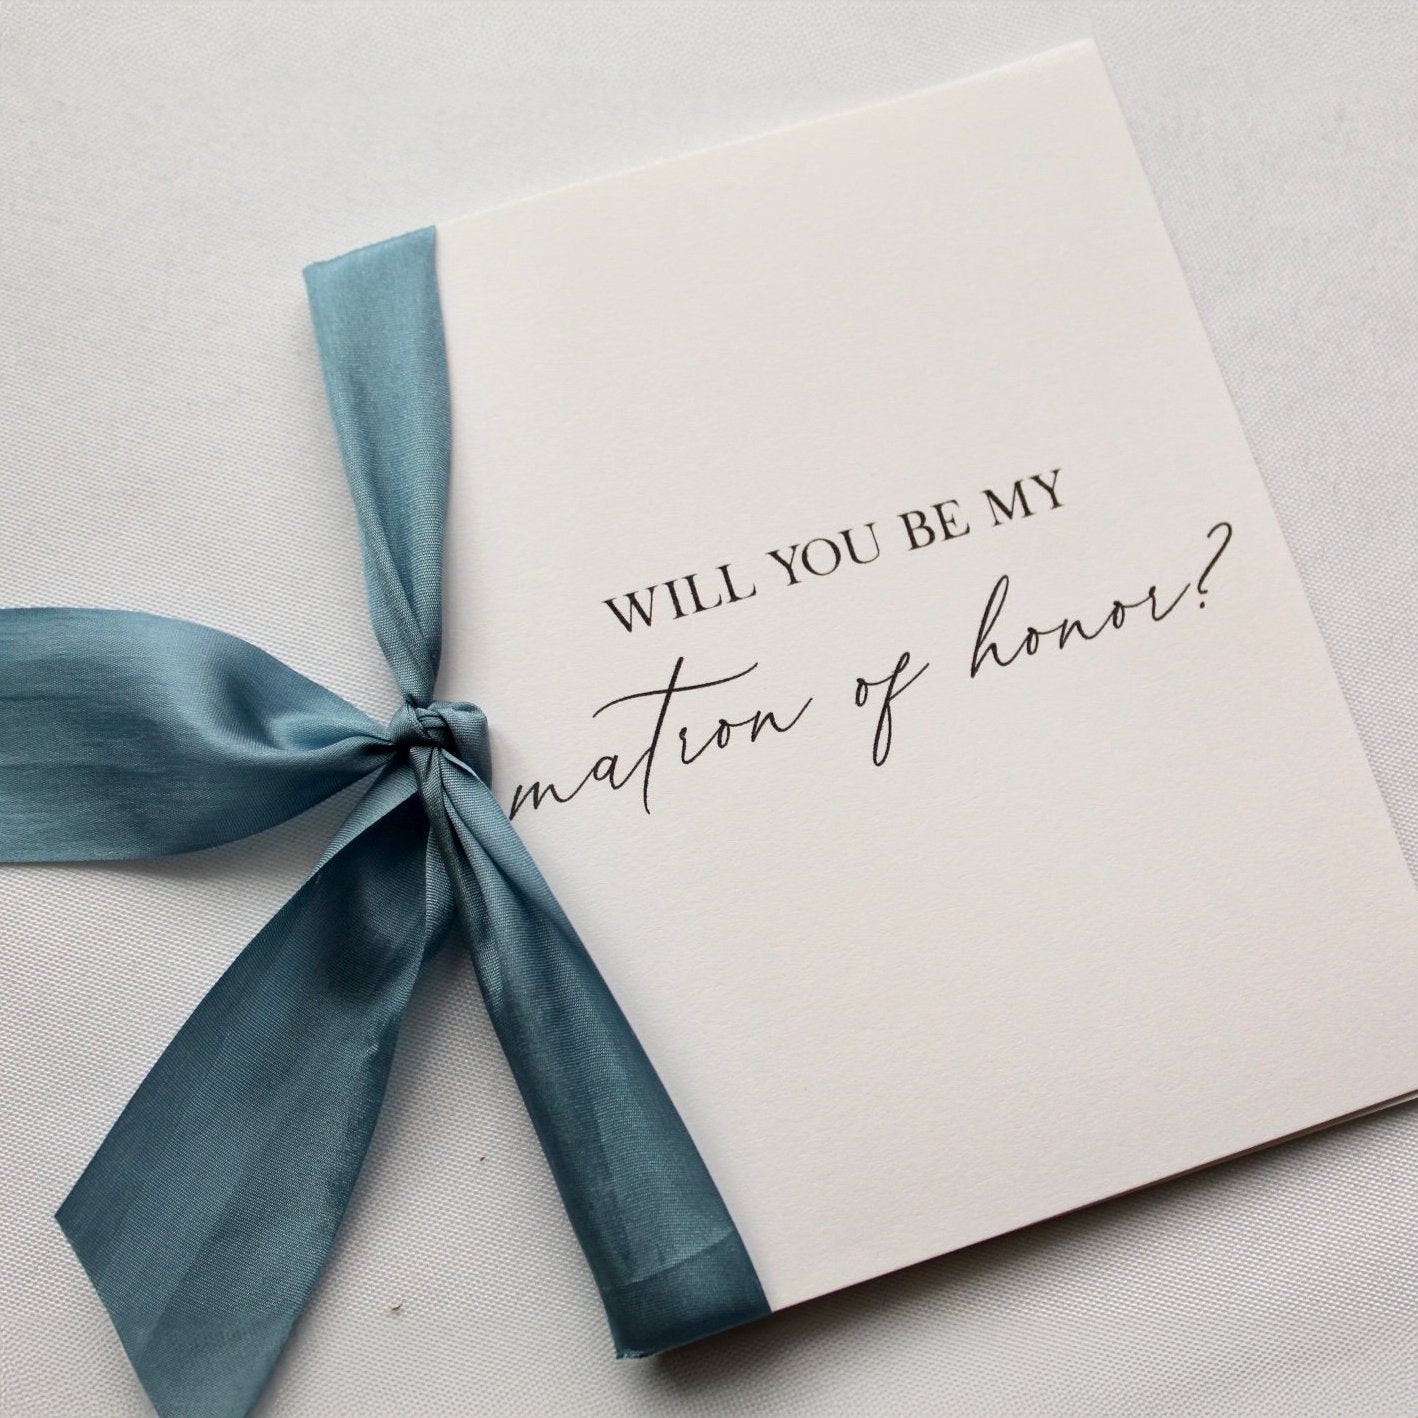 bridal-party-proposal-cards-blue